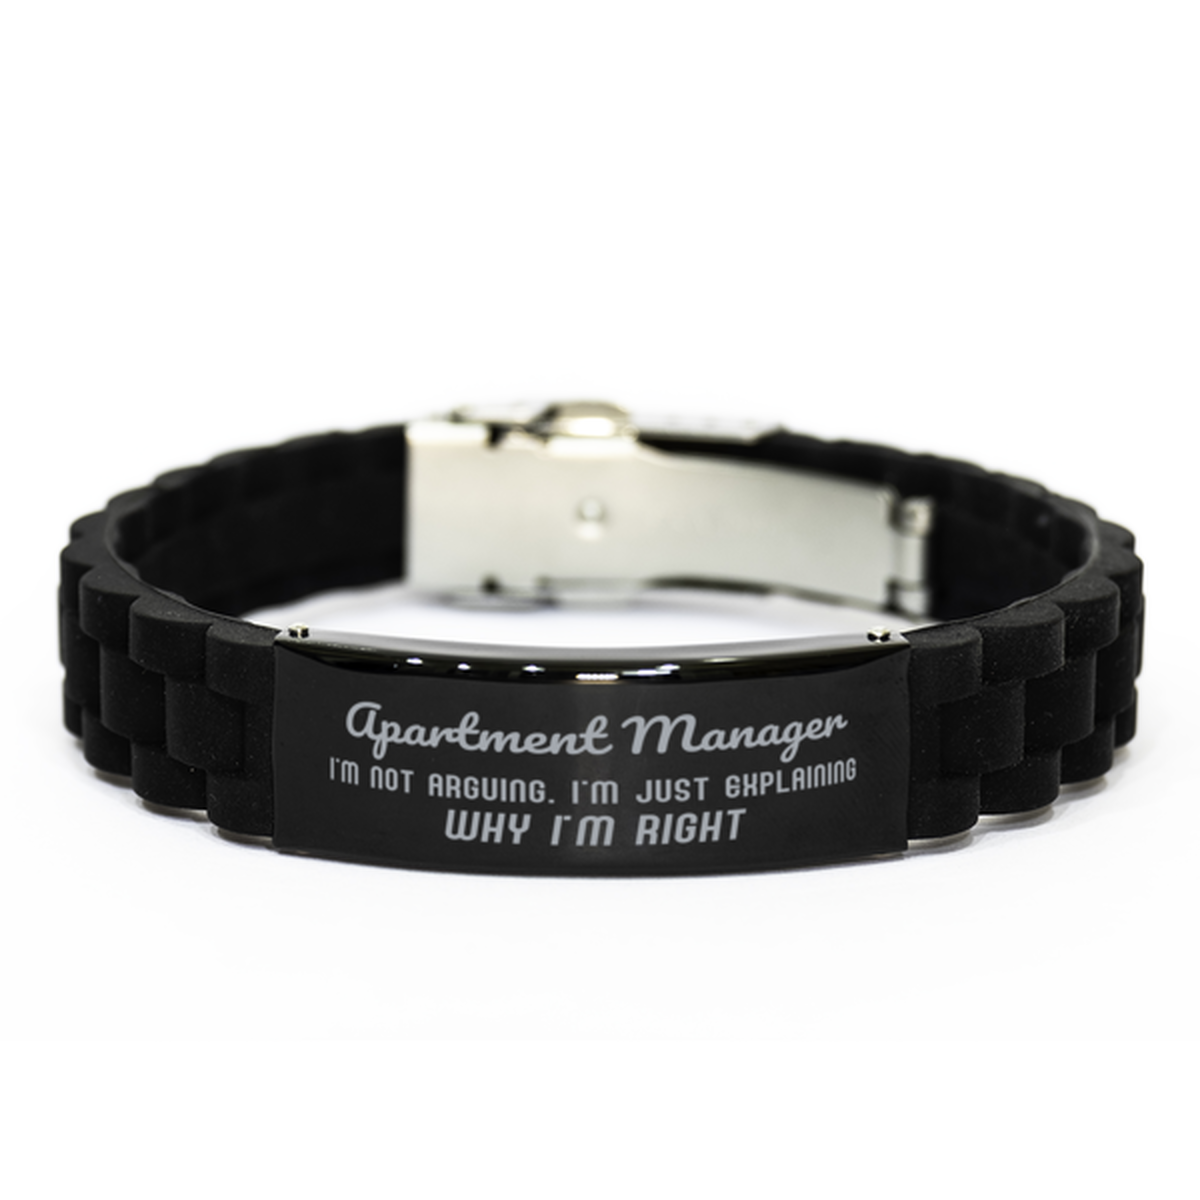 Apartment Manager I'm not Arguing. I'm Just Explaining Why I'm RIGHT Black Glidelock Clasp Bracelet, Funny Saying Quote Apartment Manager Gifts For Apartment Manager Graduation Birthday Christmas Gifts for Men Women Coworker